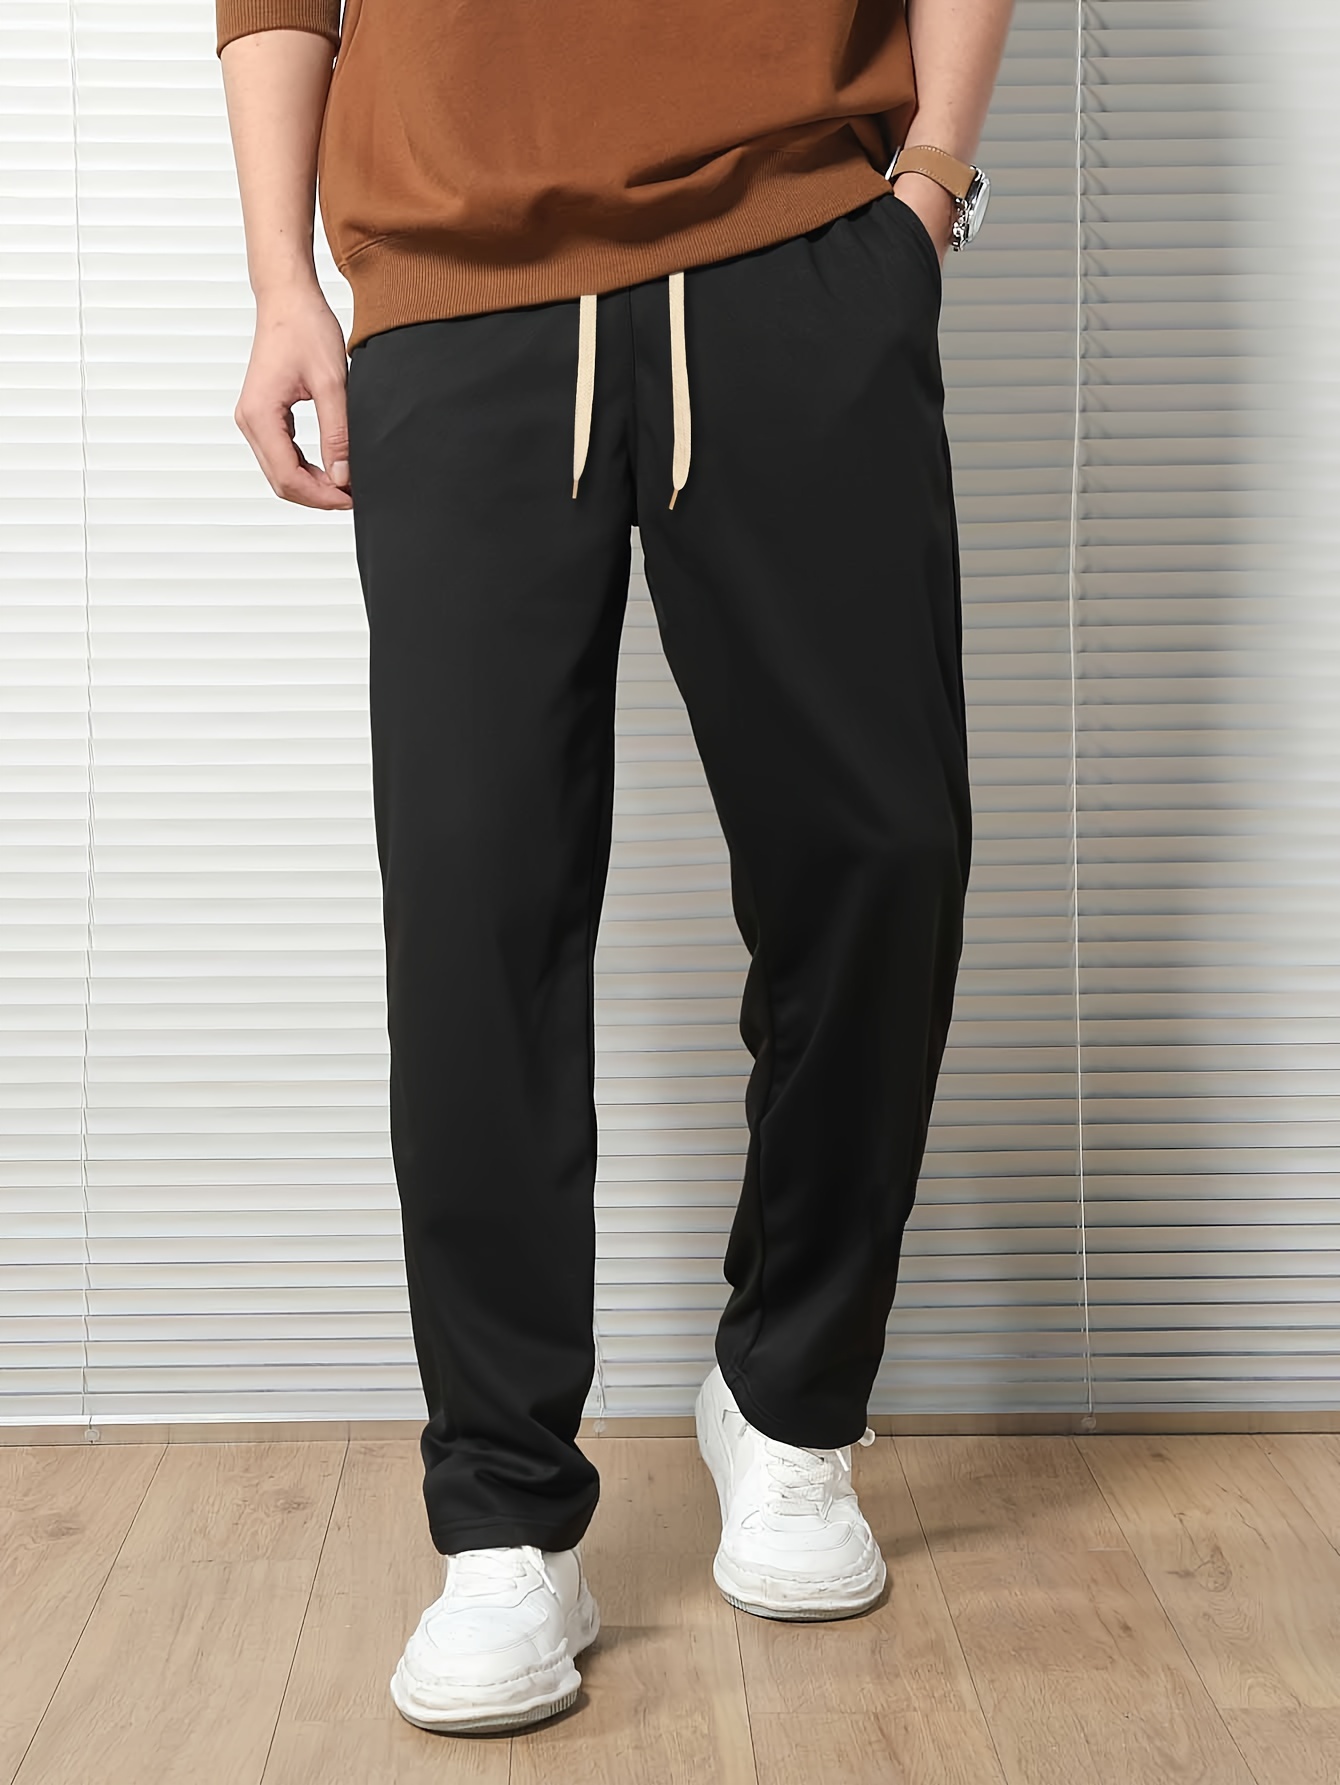 Men's Casual Sports Sweatpants Joggers Training Gym Pants Workout Cool  Trousers